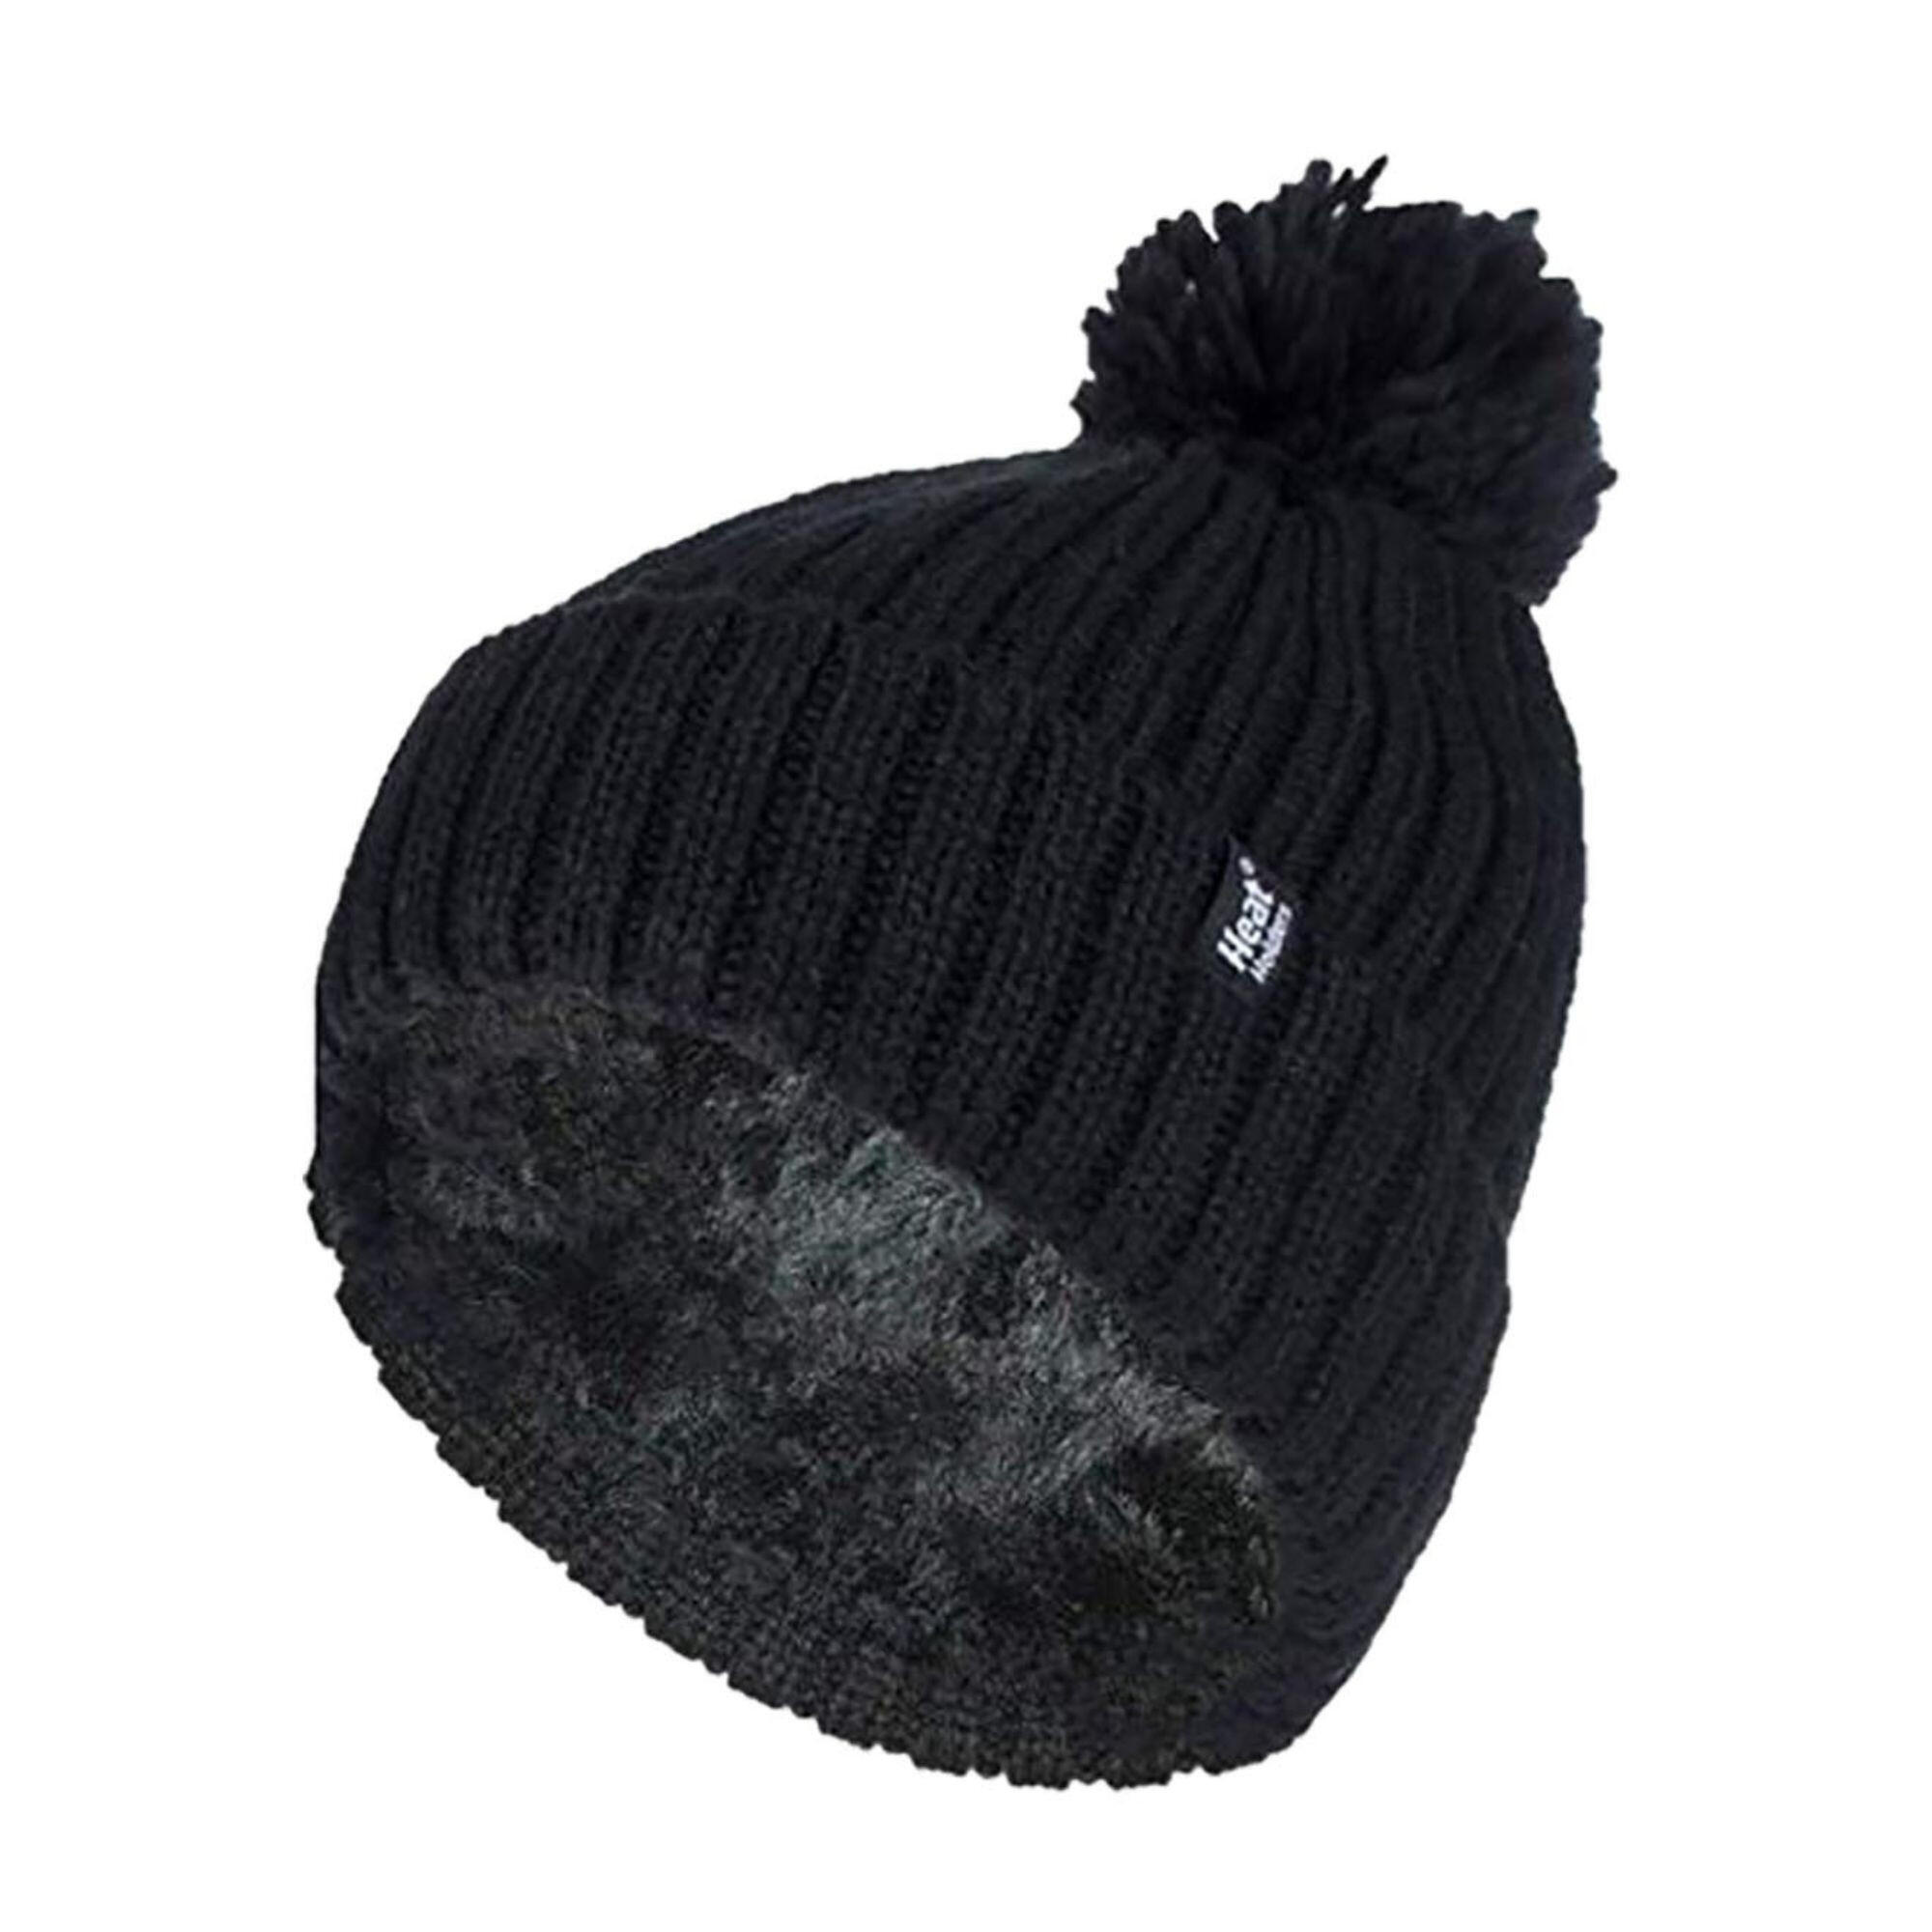 Ladies Ribbed Cuffed Thermal Insulated Winter Pom Pom Bobble Hat 1/4